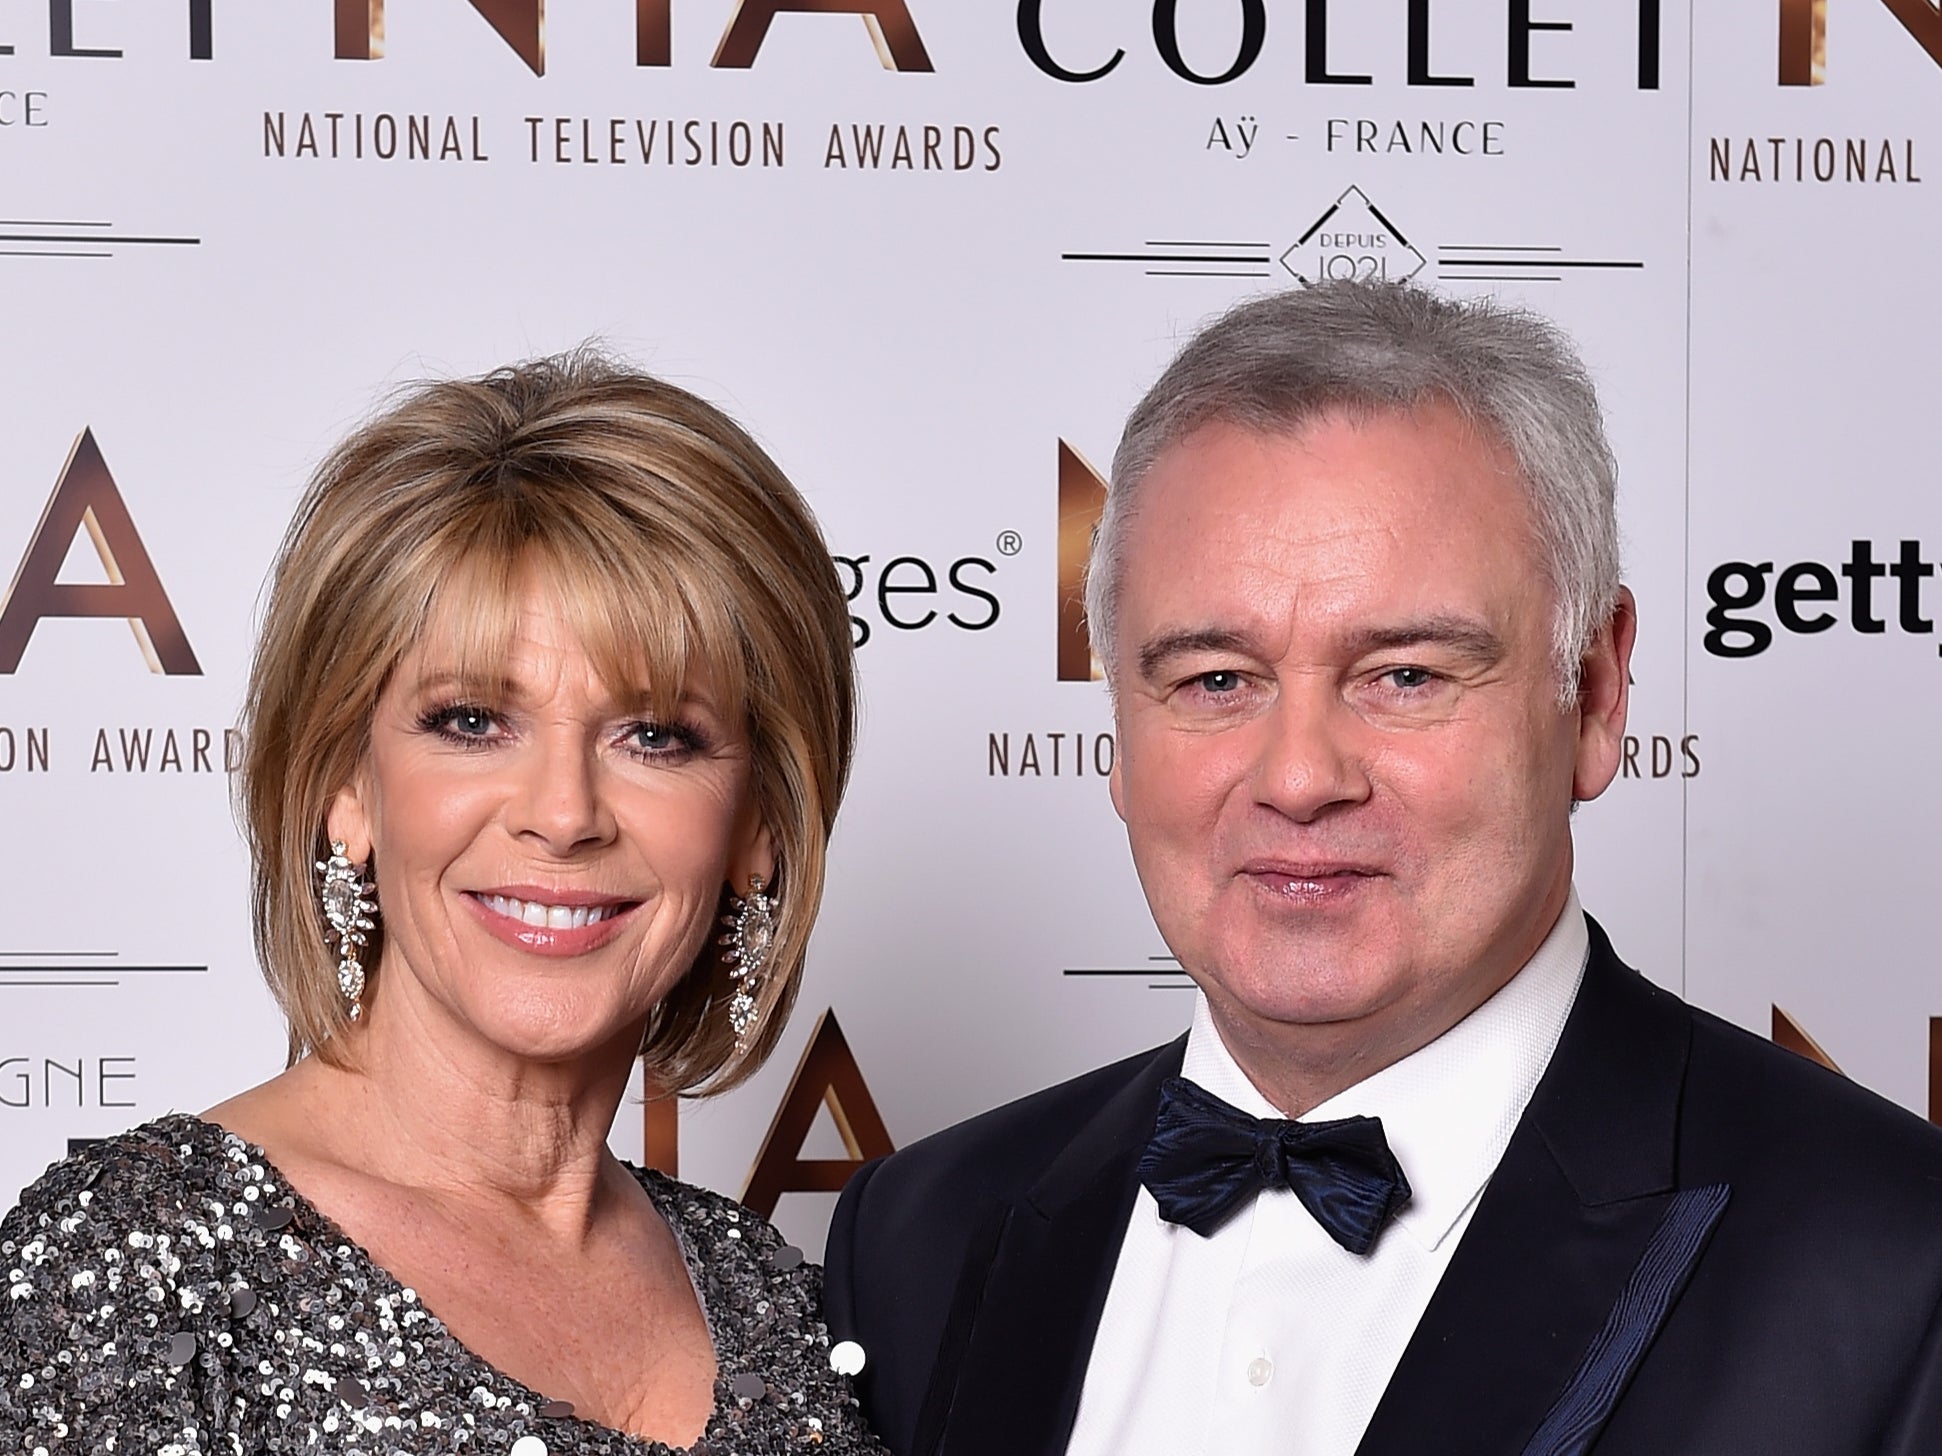 Ruth Langsford and Eamonn Holmes hope to remain friends.